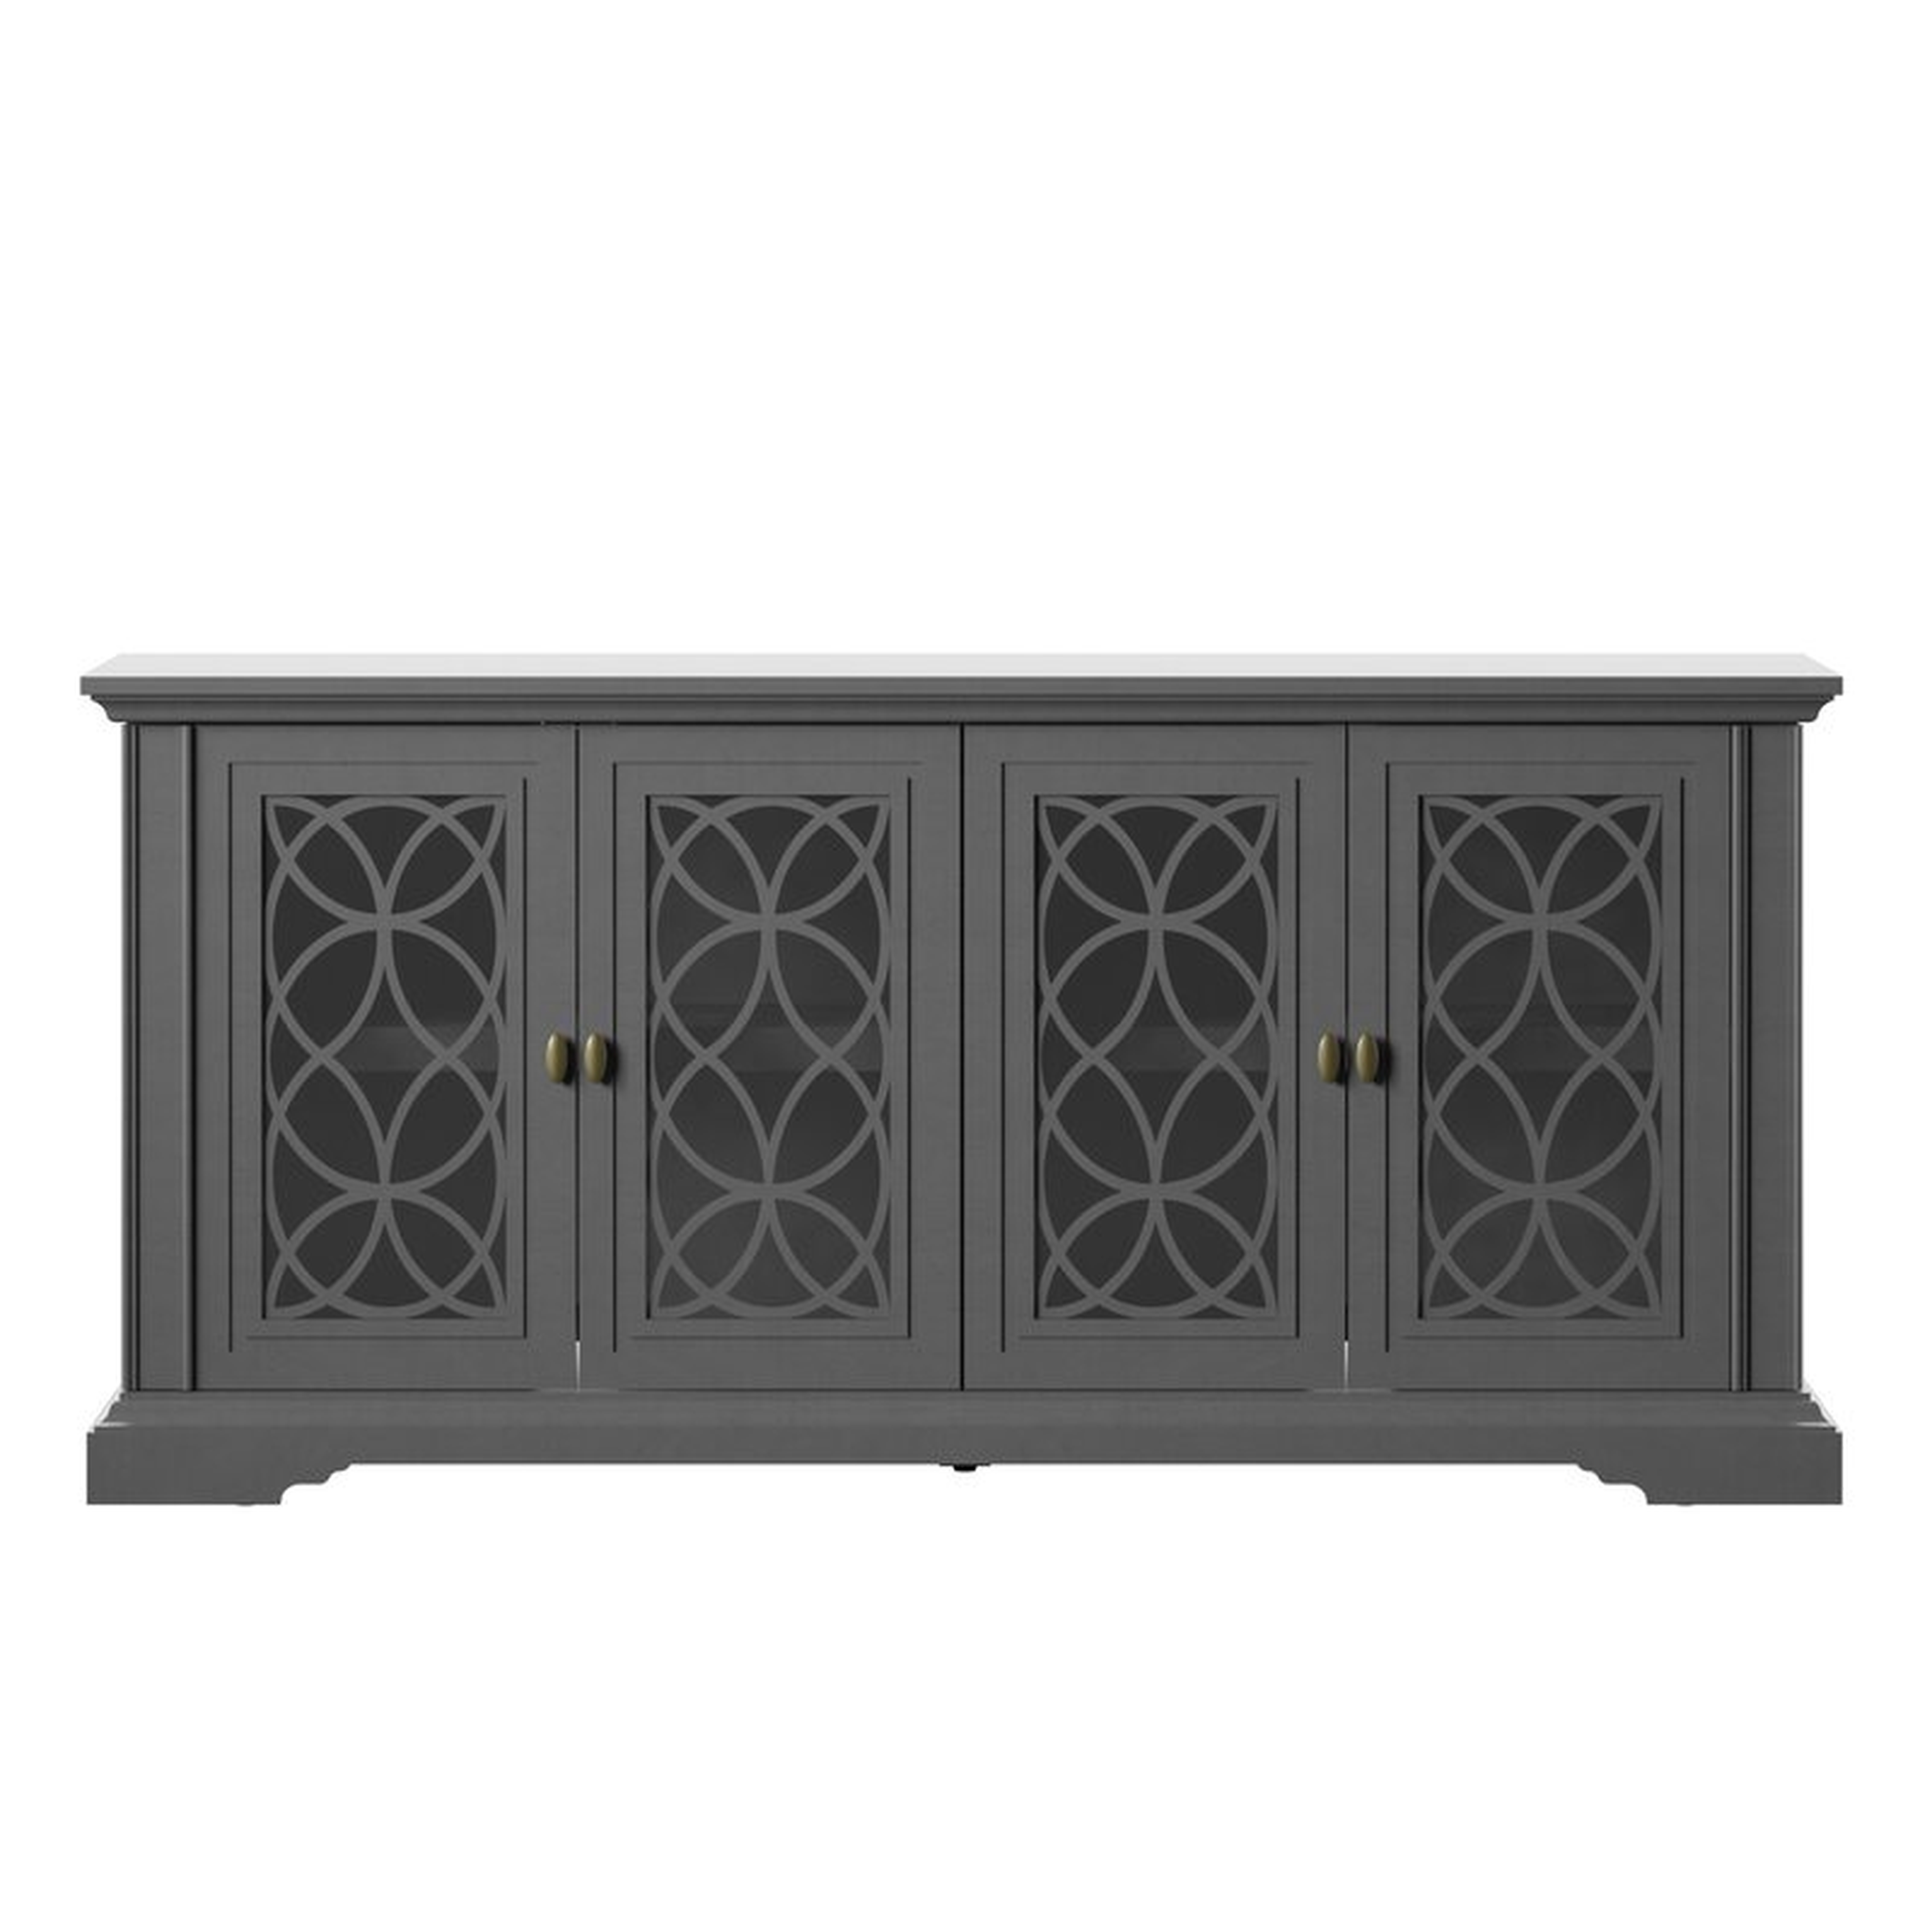 Adonay TV Stand for TVs up to 55" - Antique Gray - Wayfair